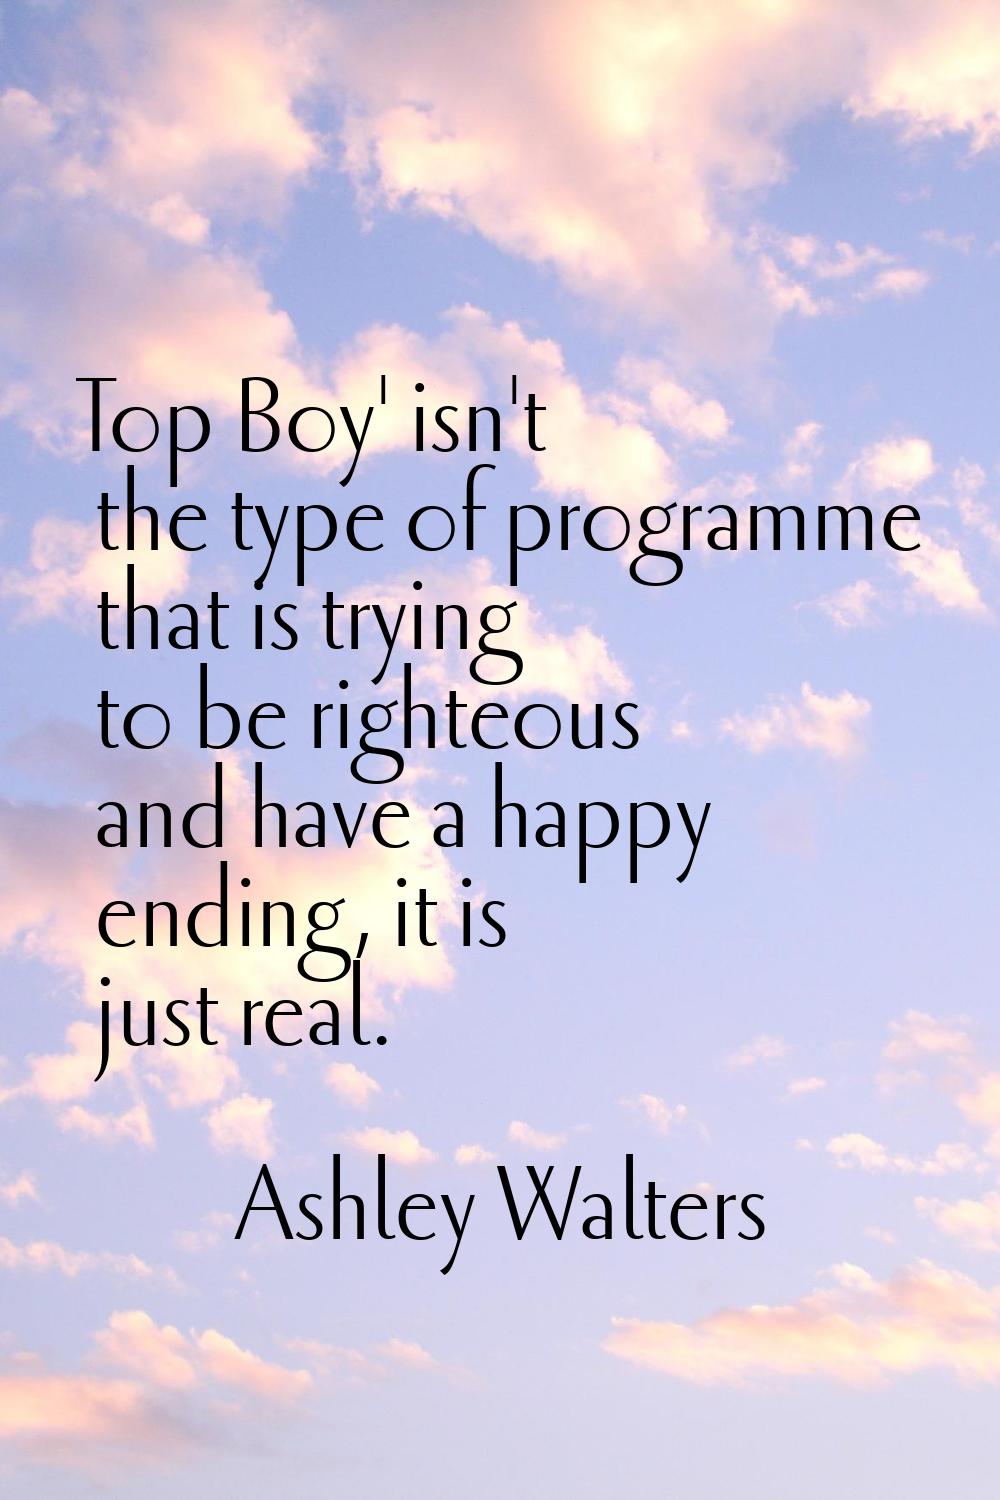 Top Boy' isn't the type of programme that is trying to be righteous and have a happy ending, it is 